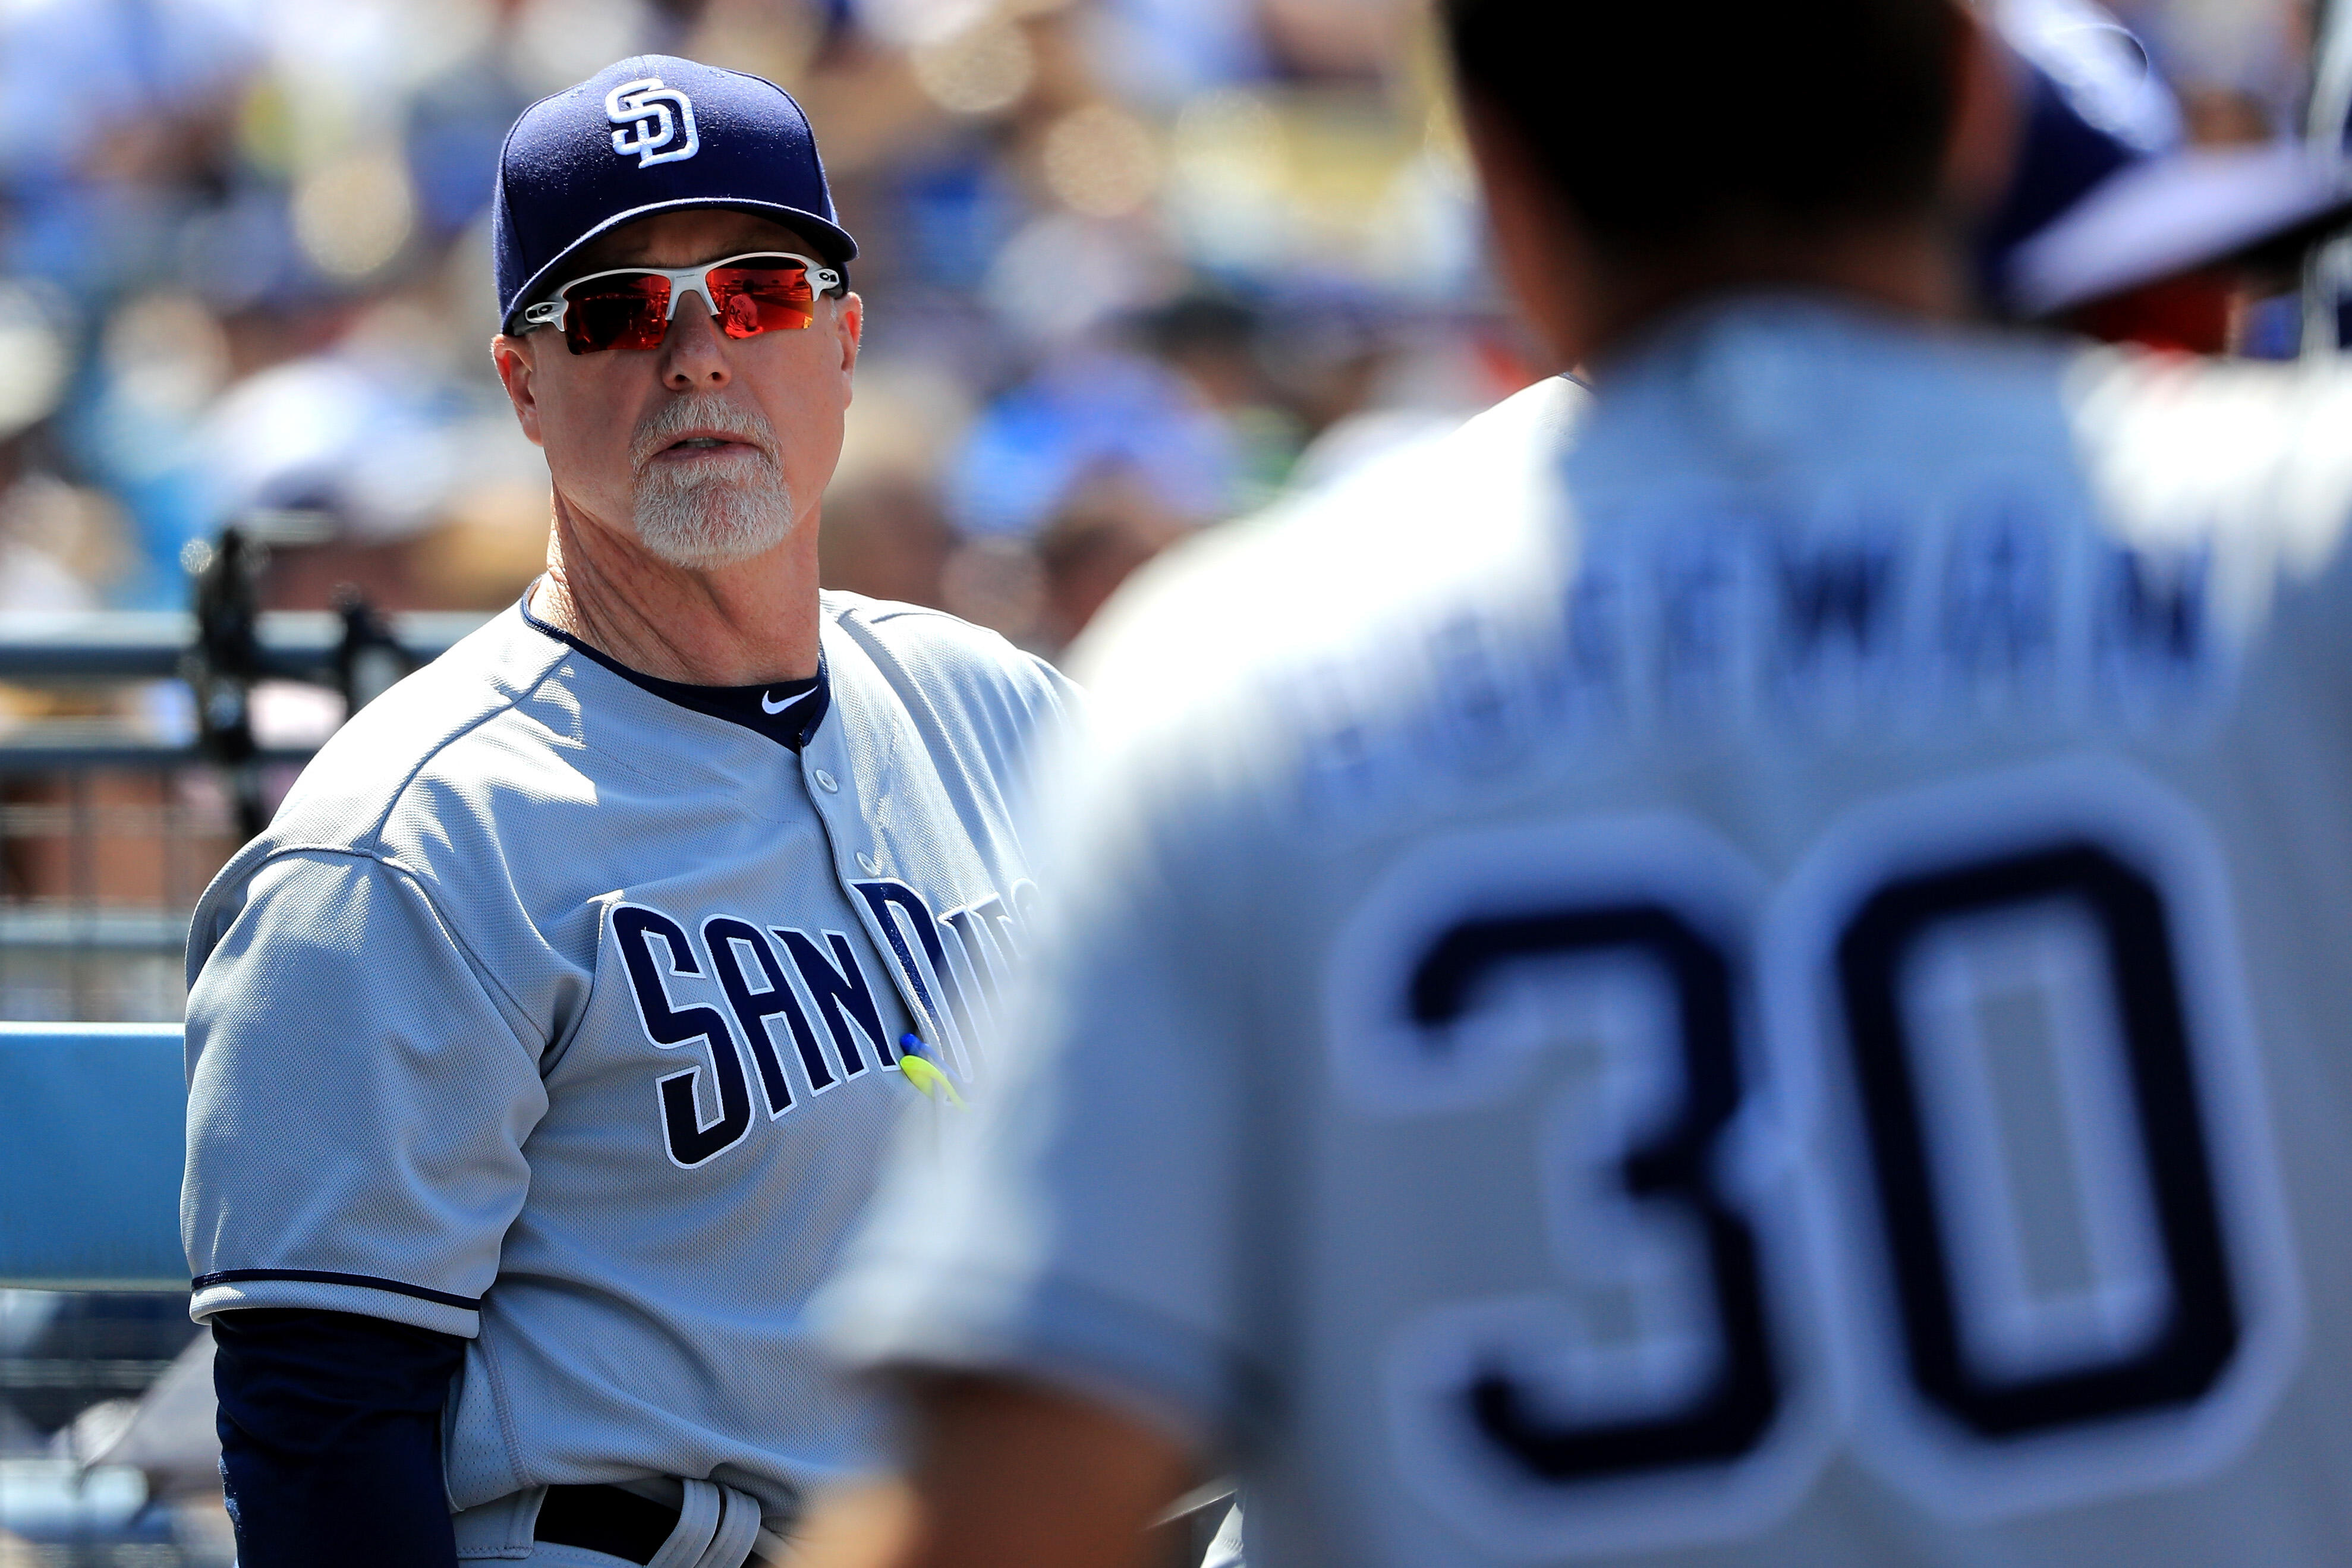 LOS ANGELES, CA - APRIL 03:  Bench Coach Mark McGwire of the San Diego Padres looks on during the fifth inning of an Opening Day game against the Los Angeles Dodgers at Dodger Stadium on April 3, 2017 in Los Angeles, California.  (Photo by Sean M. Haffey/